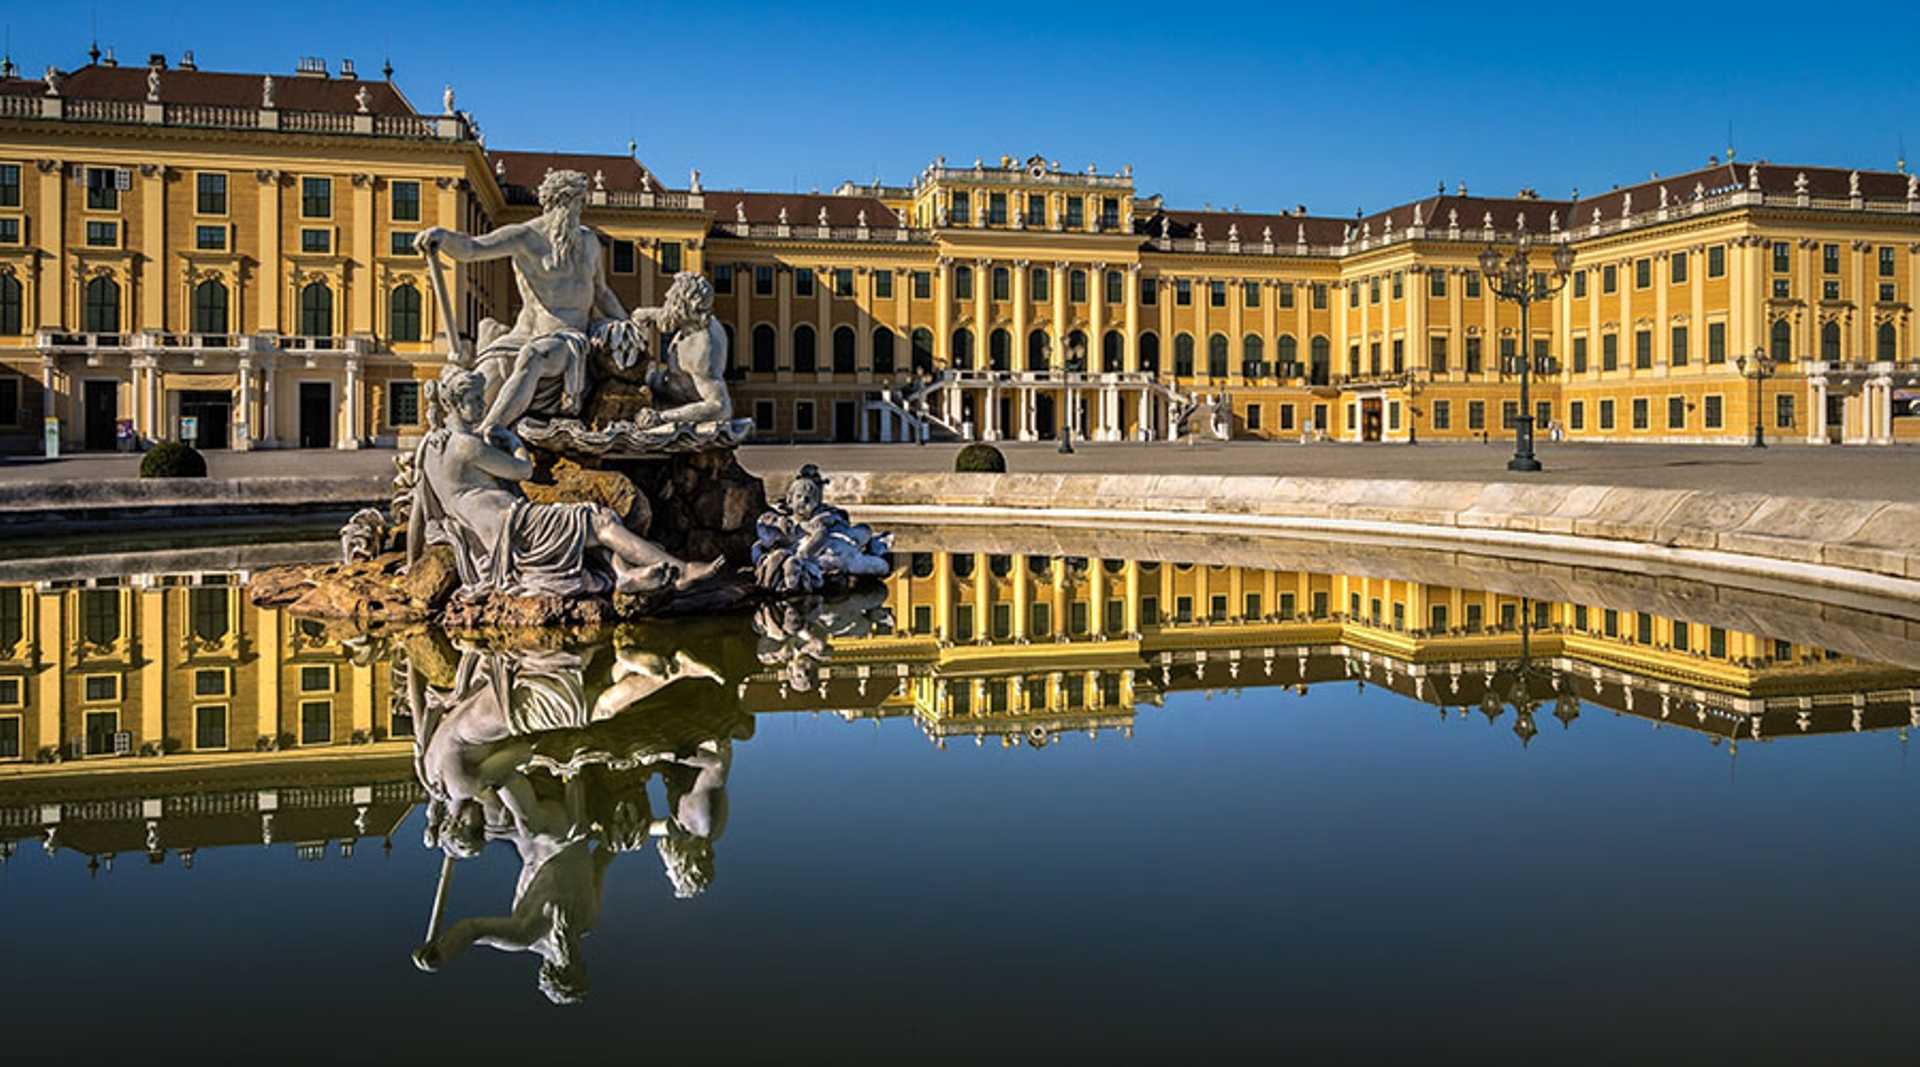 Schonbrunn: the Public Grandeur and Private Realities of Emperors